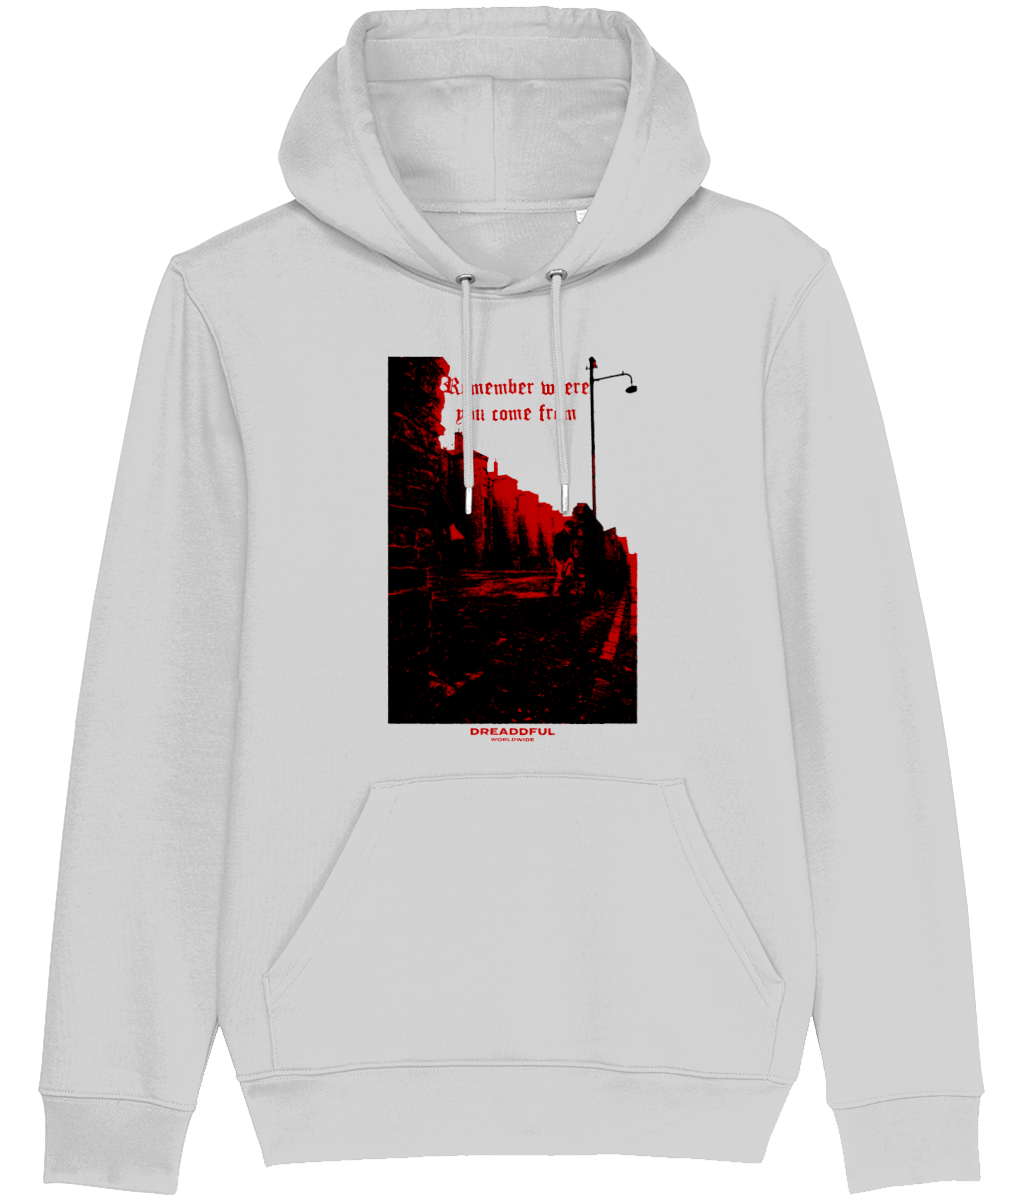 REMEMBER WHERE YOU COME FROM HOODIE